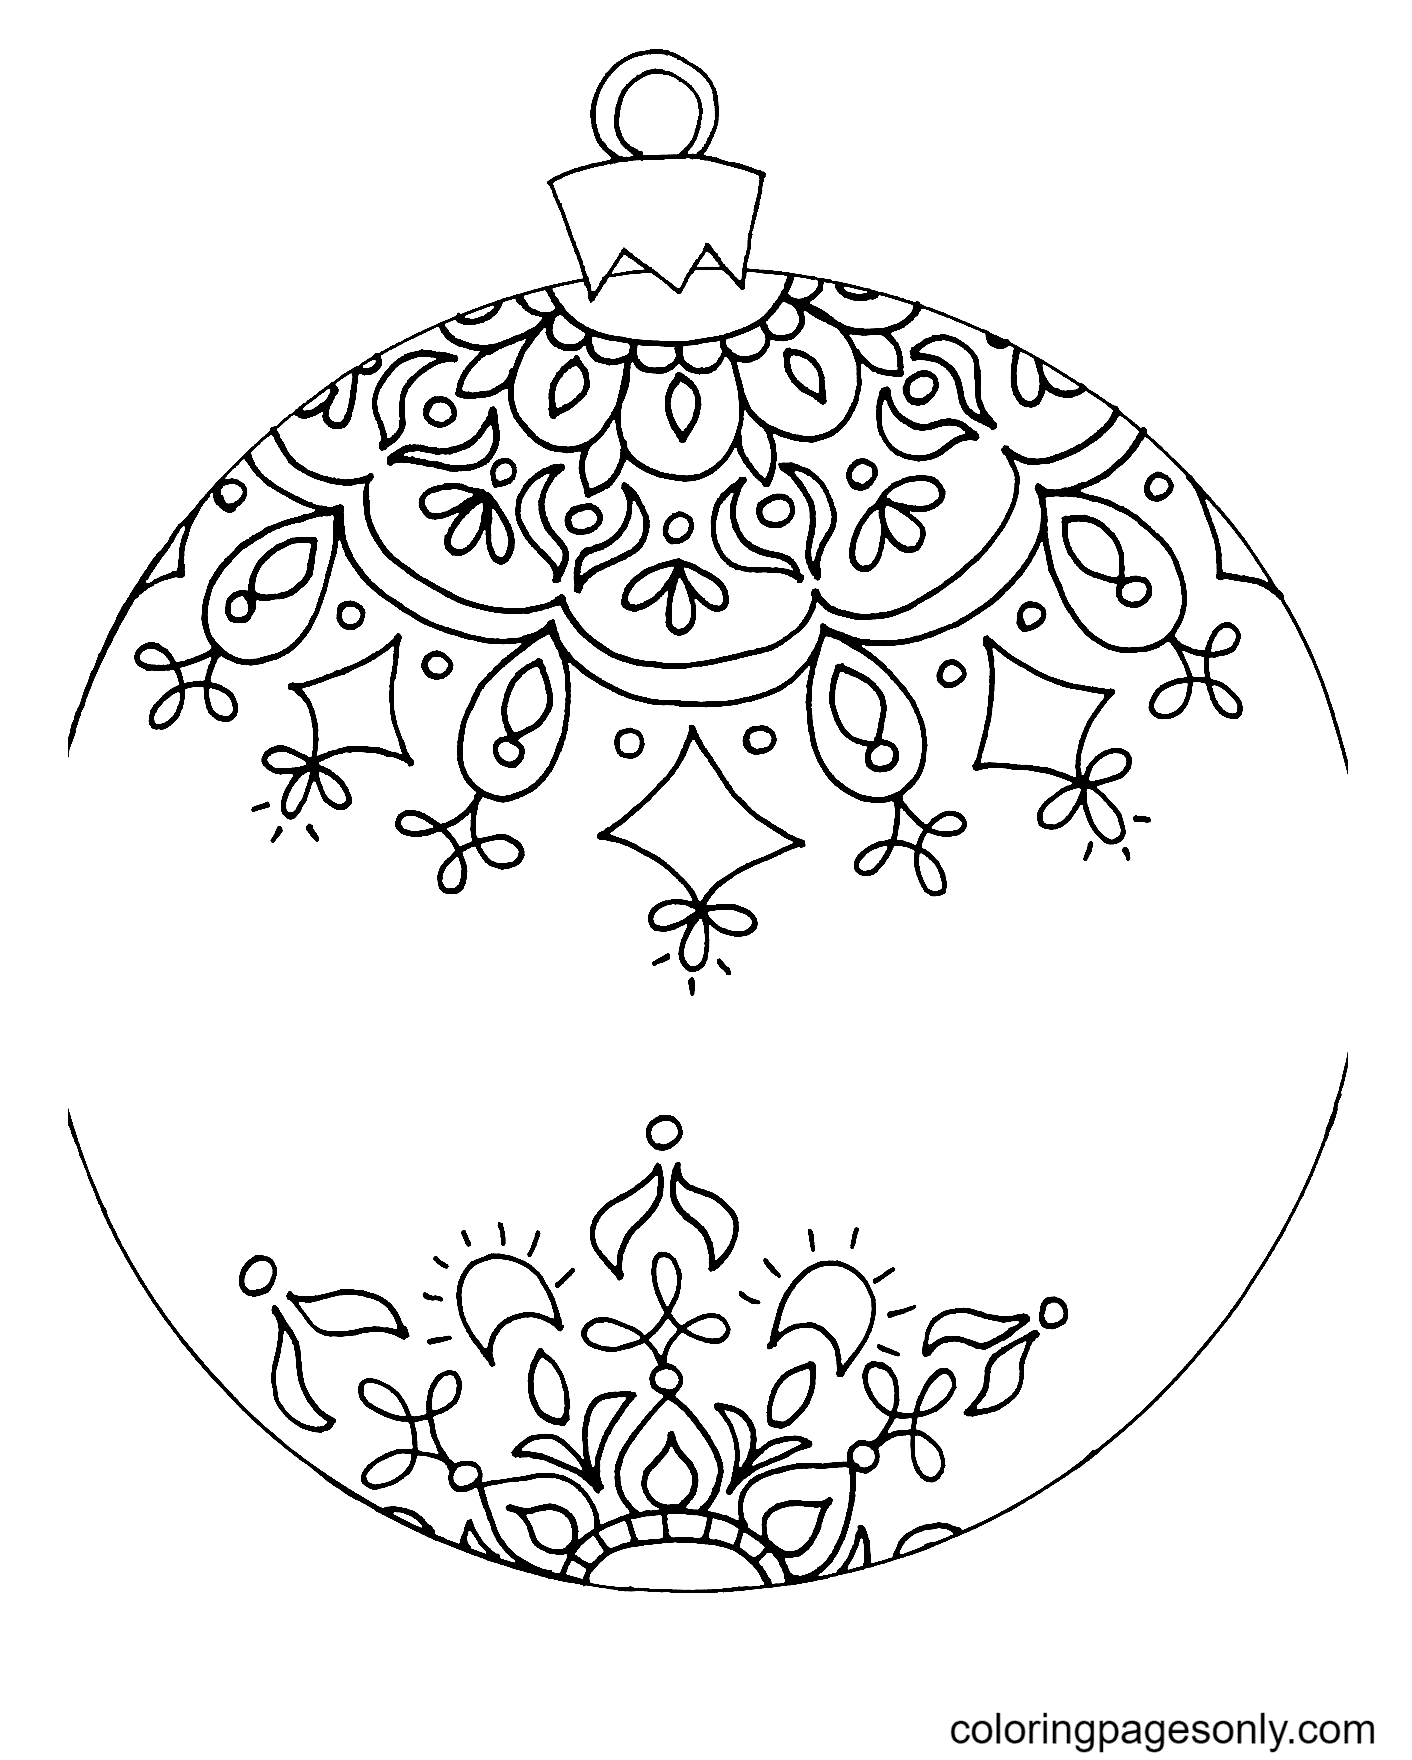 Childrens Christmas Ornaments Coloring Page